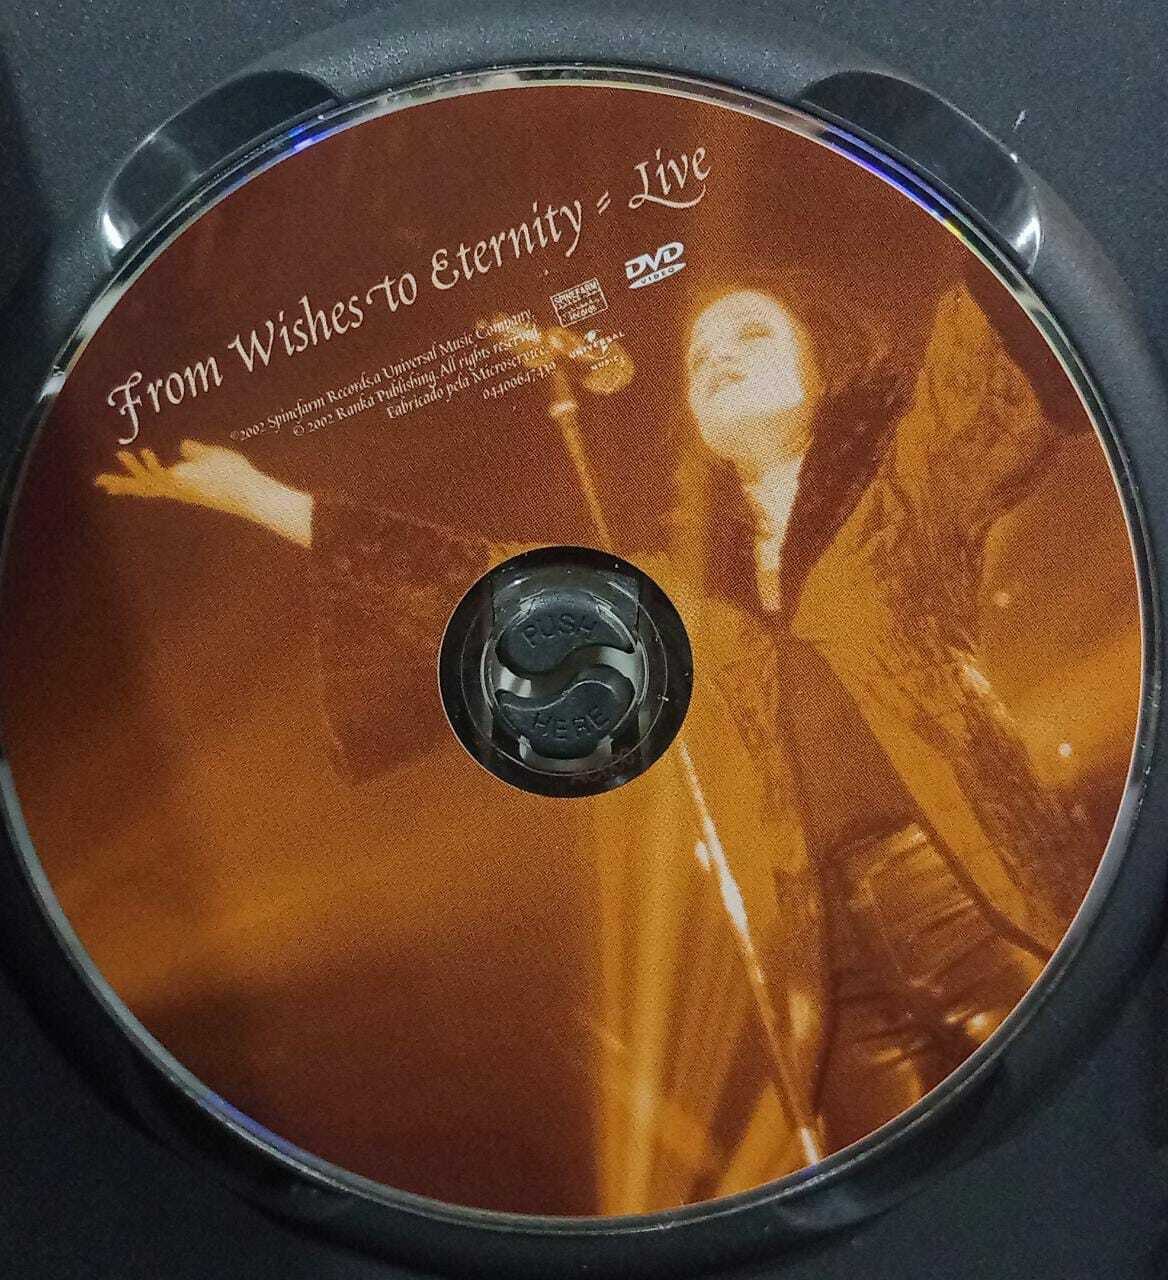 DVD - Nightwish - From Wishes to Eternity Live